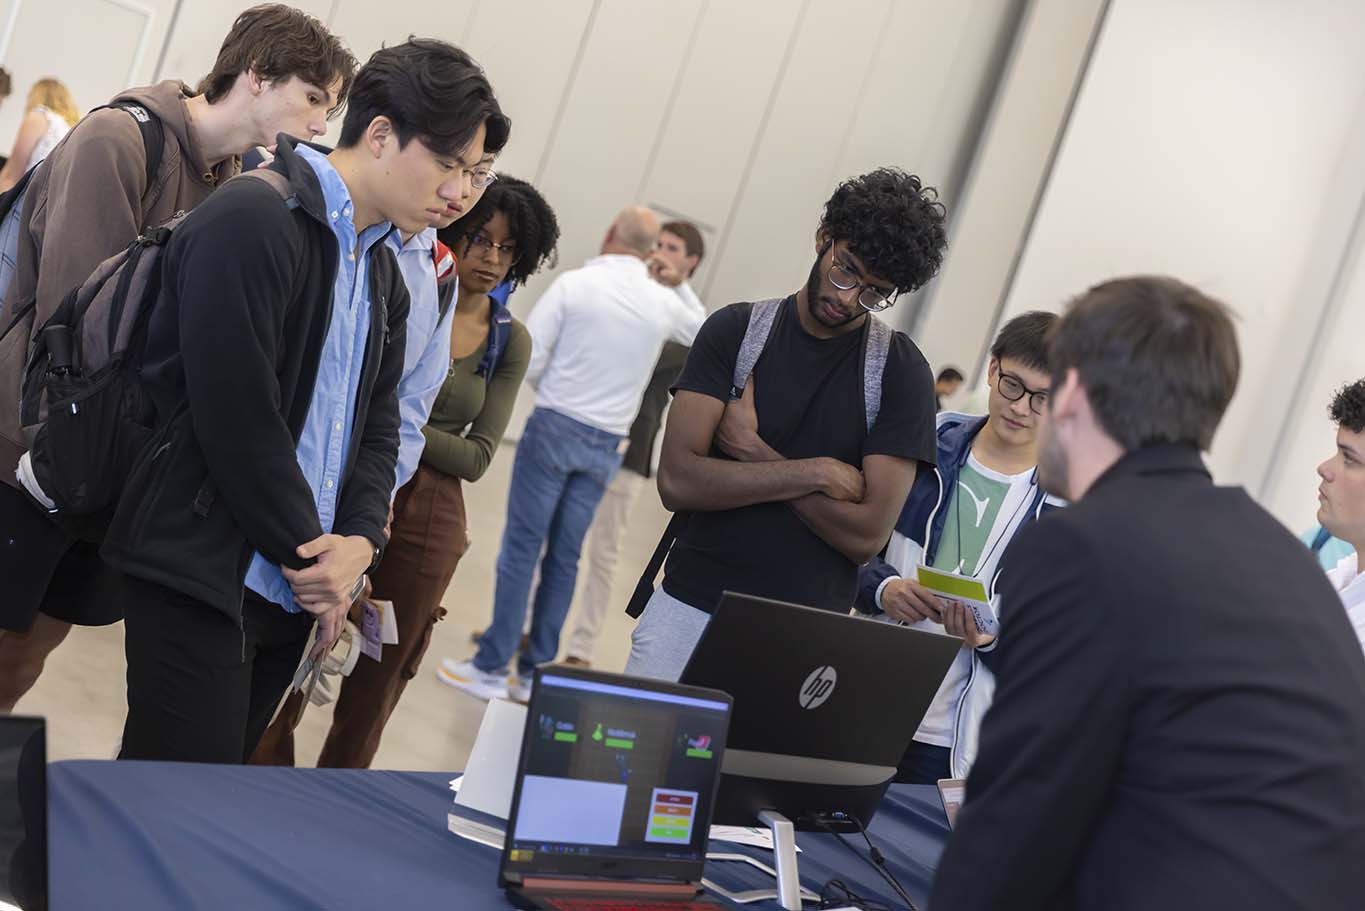 Dozens of teams presented projects at the CS Junior Design Capstone Expo. (Photos by Terence Rushin/College of Computing)